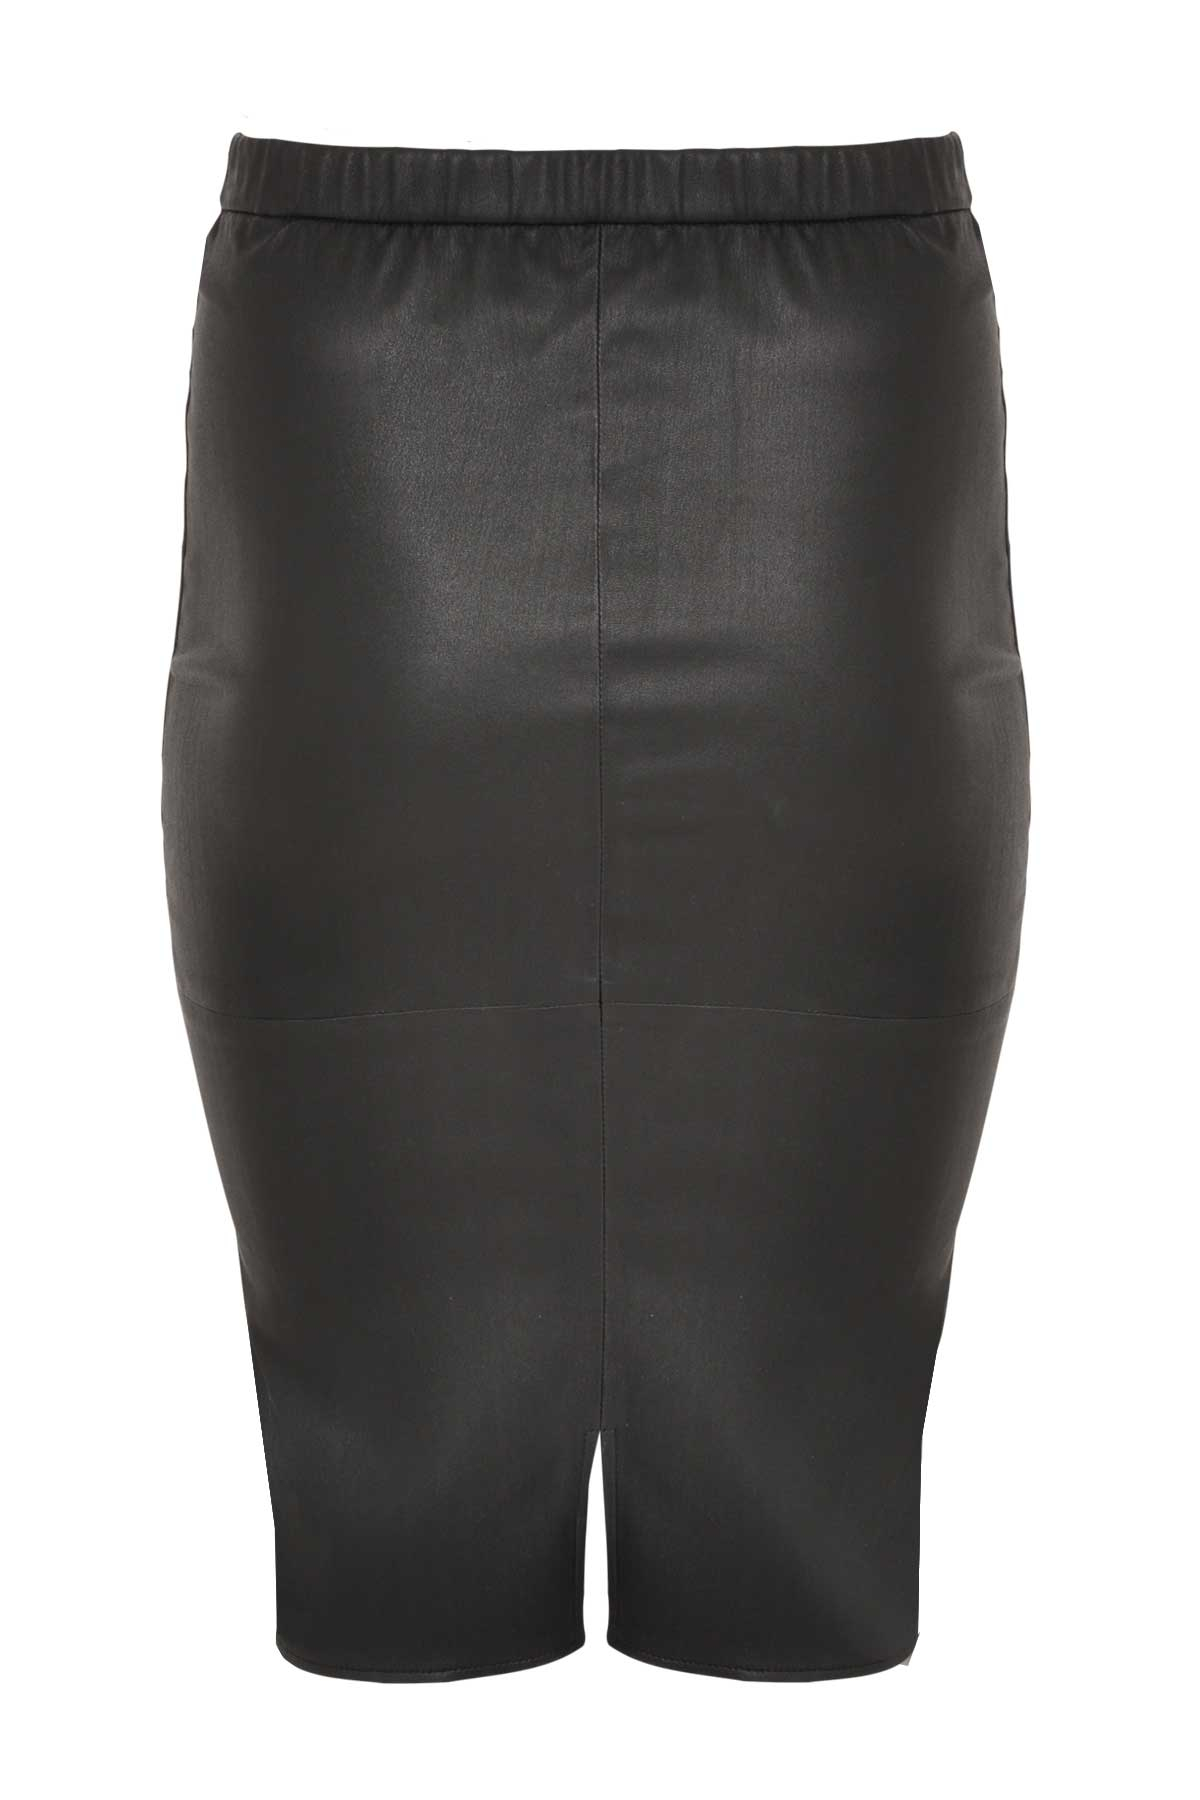 Skirt stretch leather - black brown